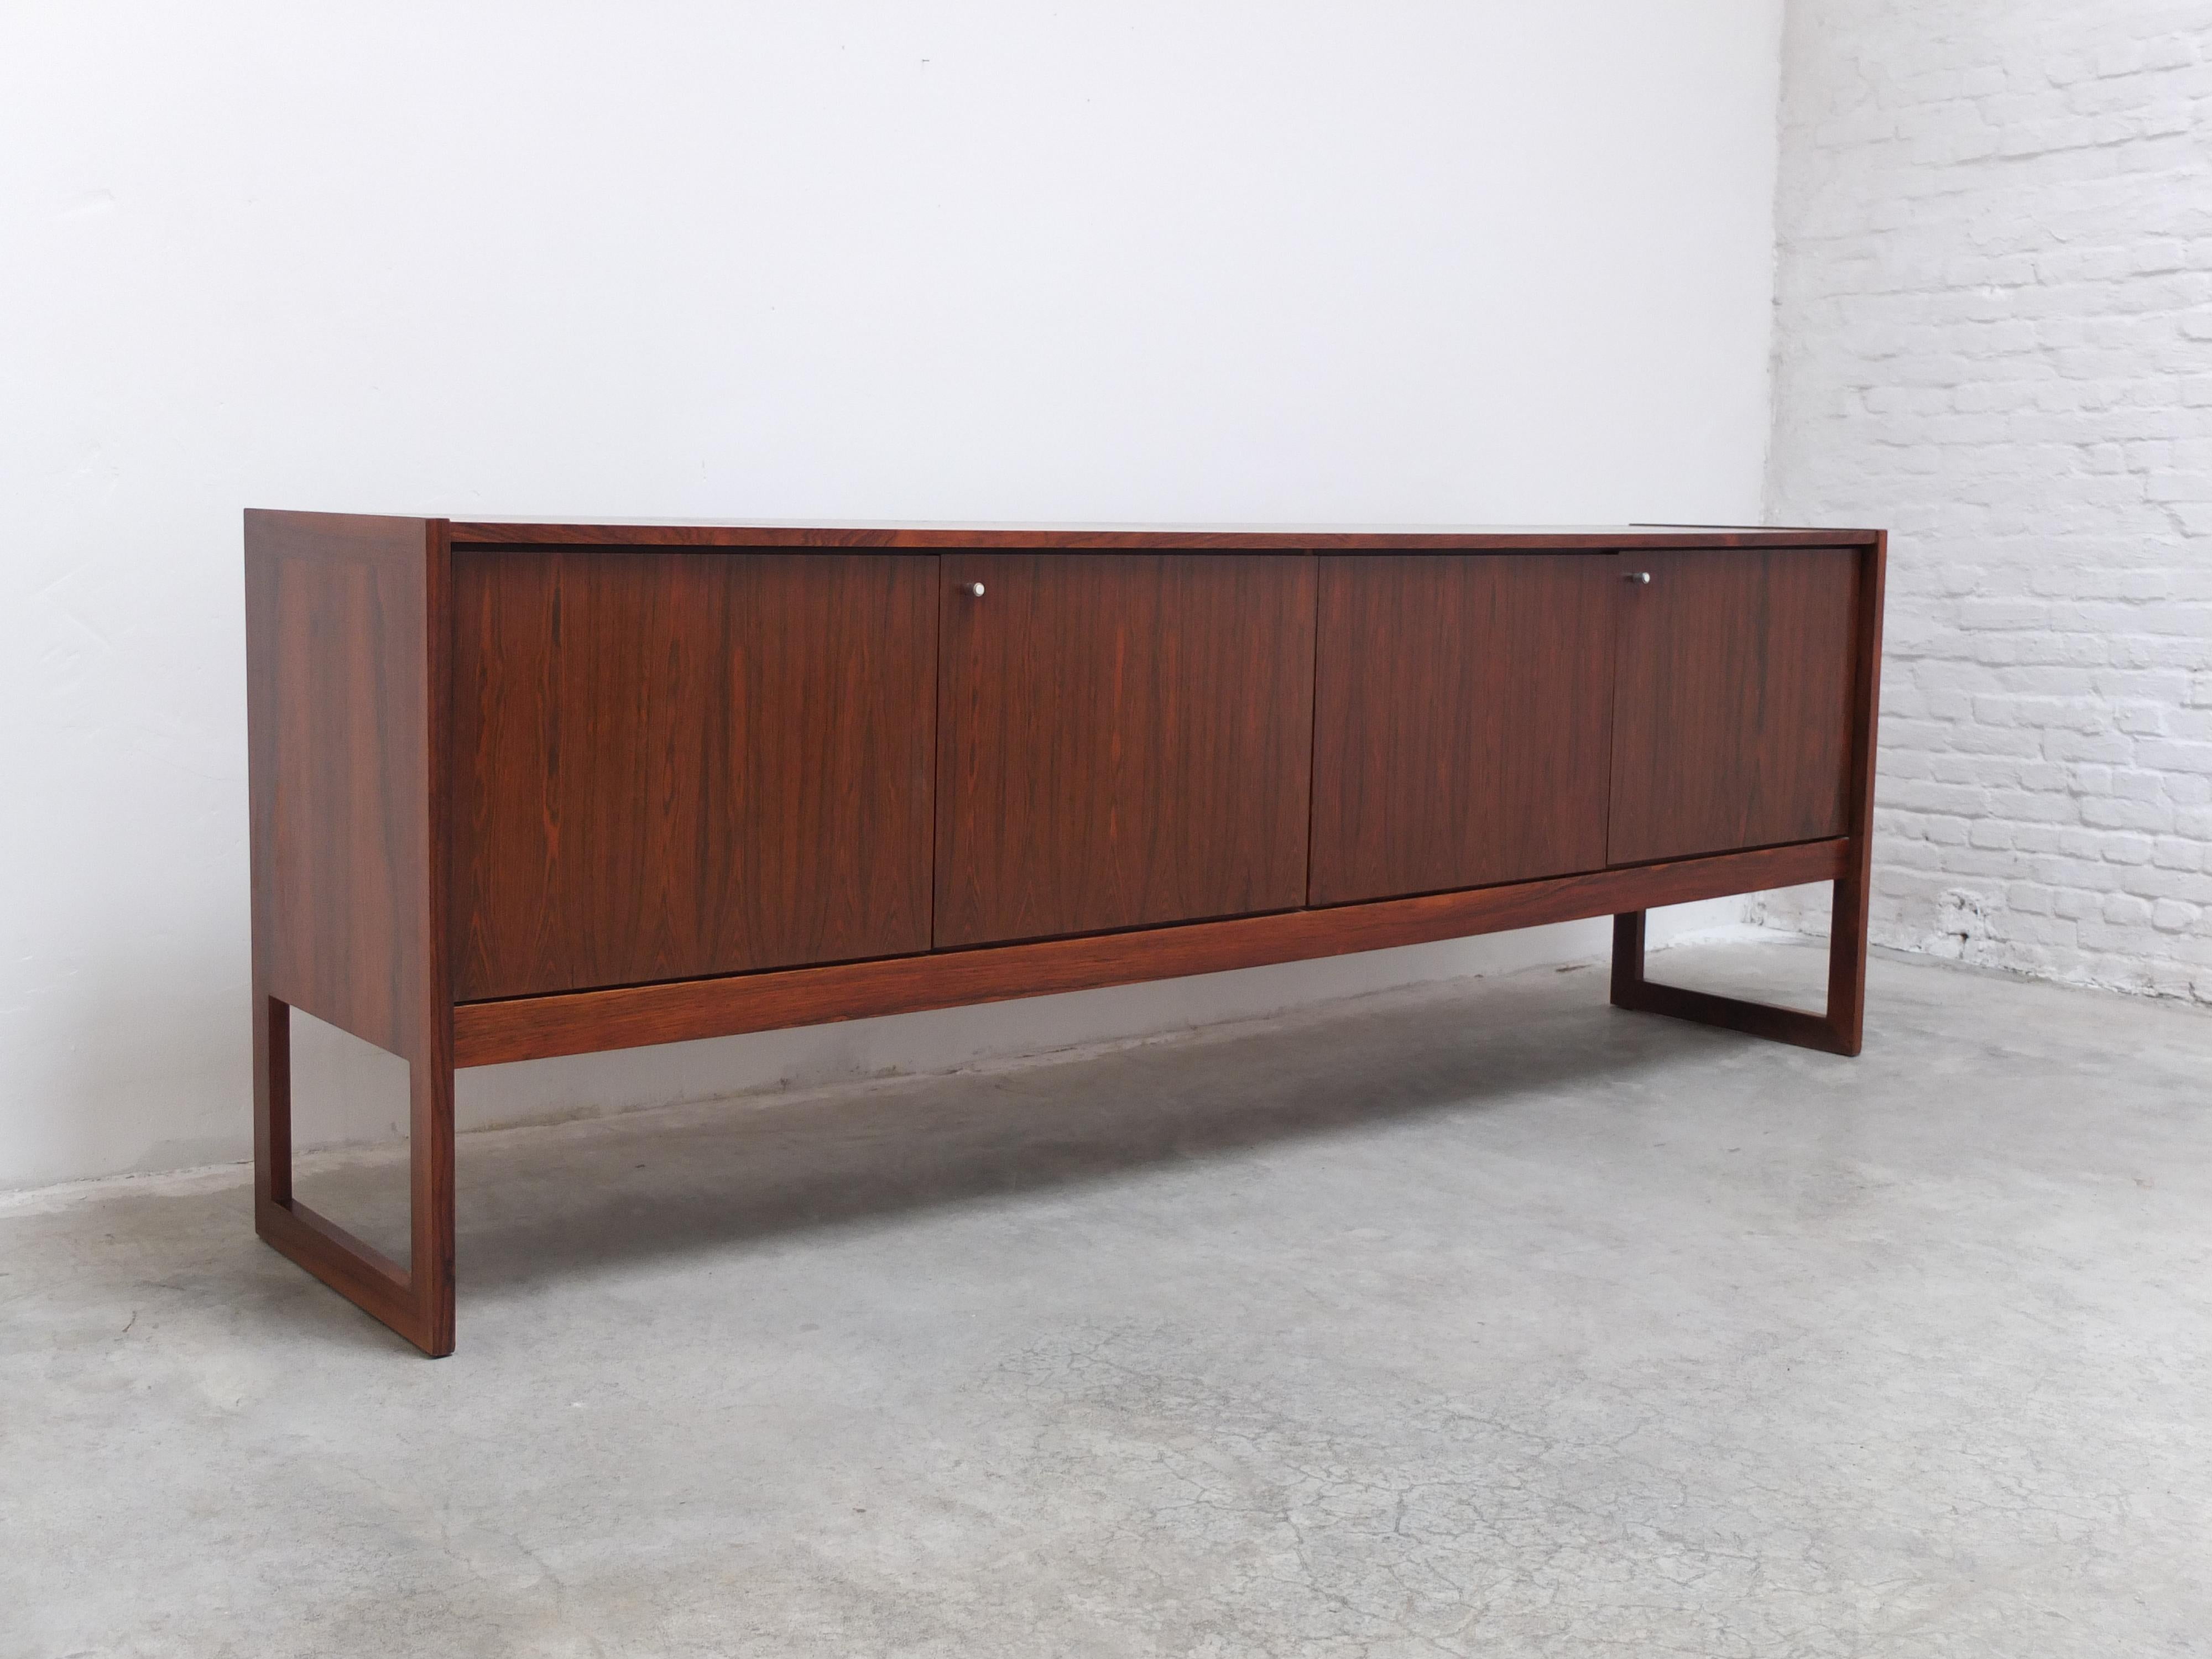 Belgian Large Exclusive 'Tecton' Sideboard by V-Form, 1960s For Sale